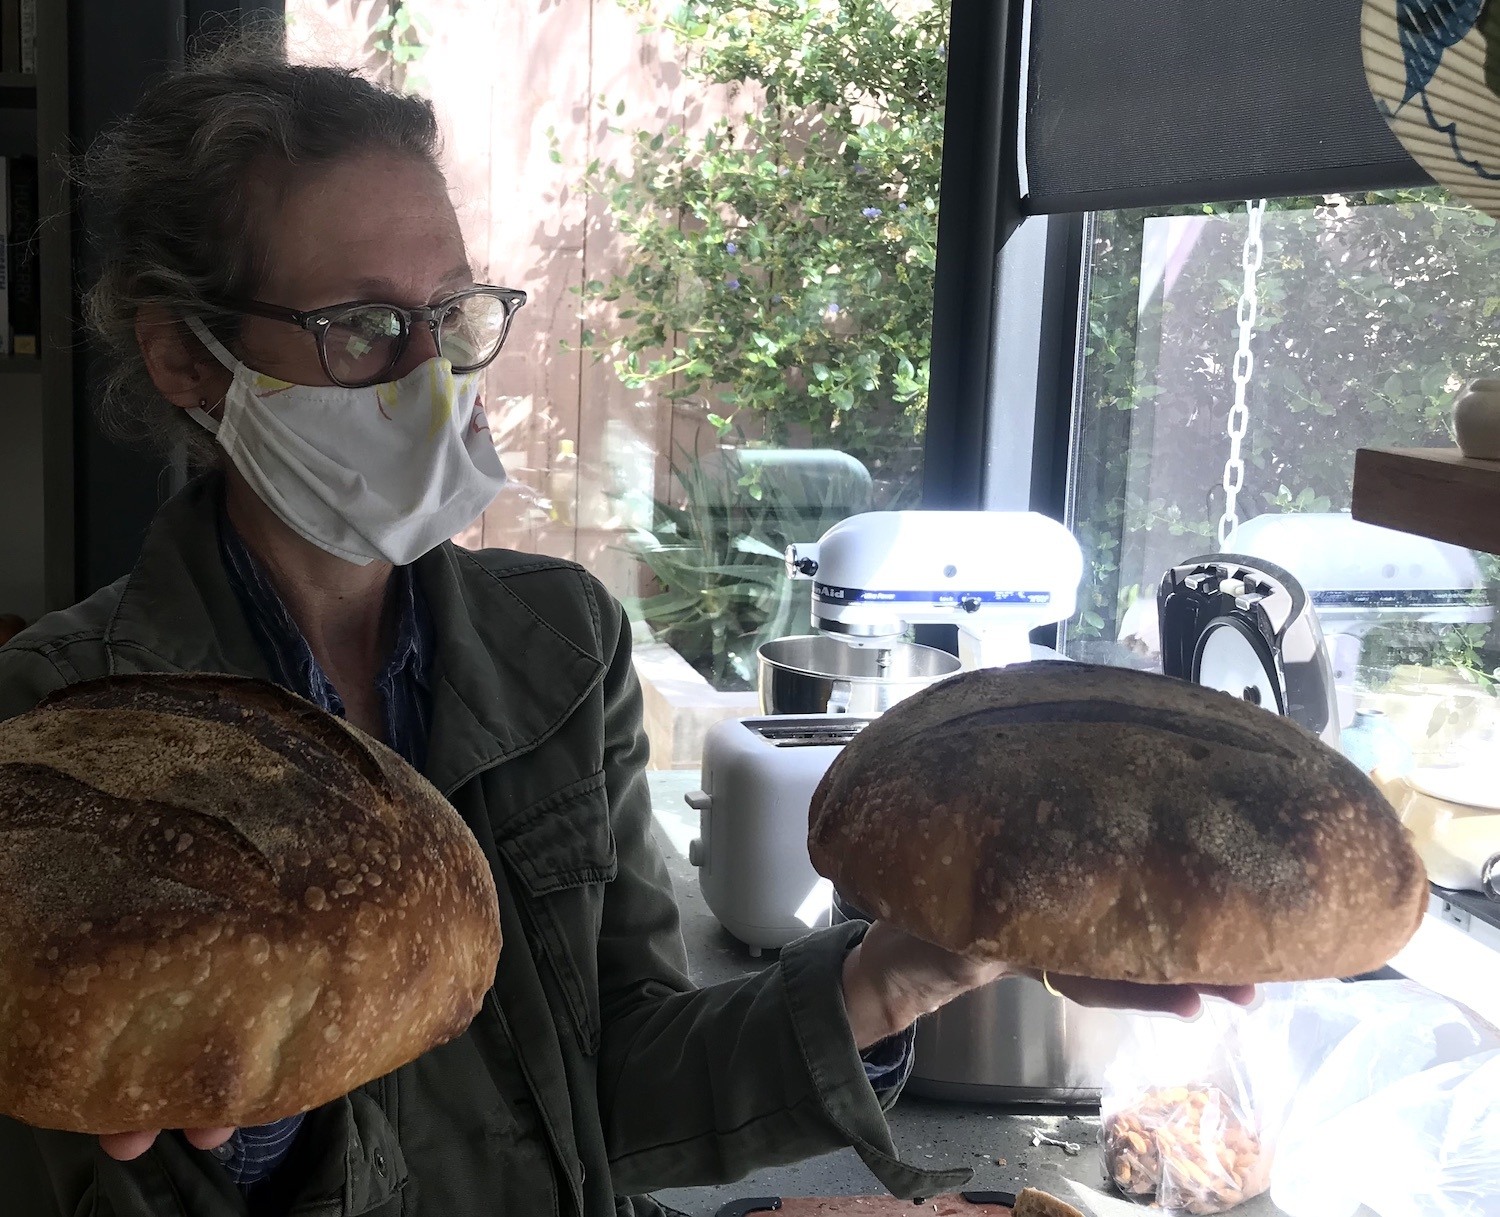 Isabel Adler's mother poses with two loaves of bread. August 2020